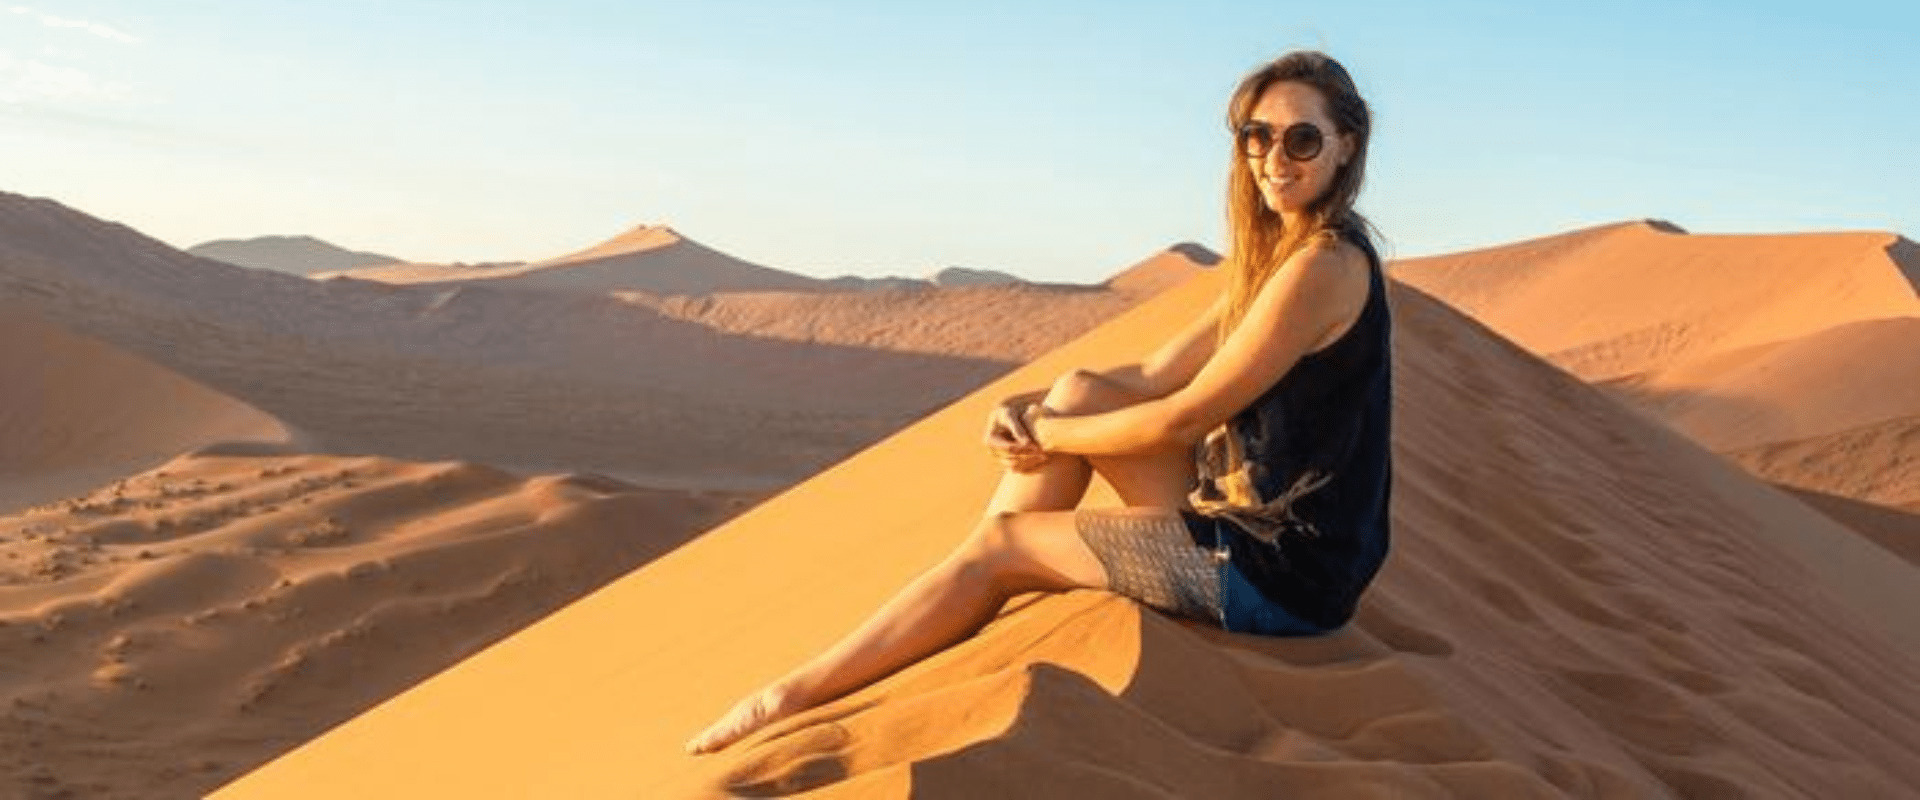 A woman sitting on top of a sand dune in the desert.